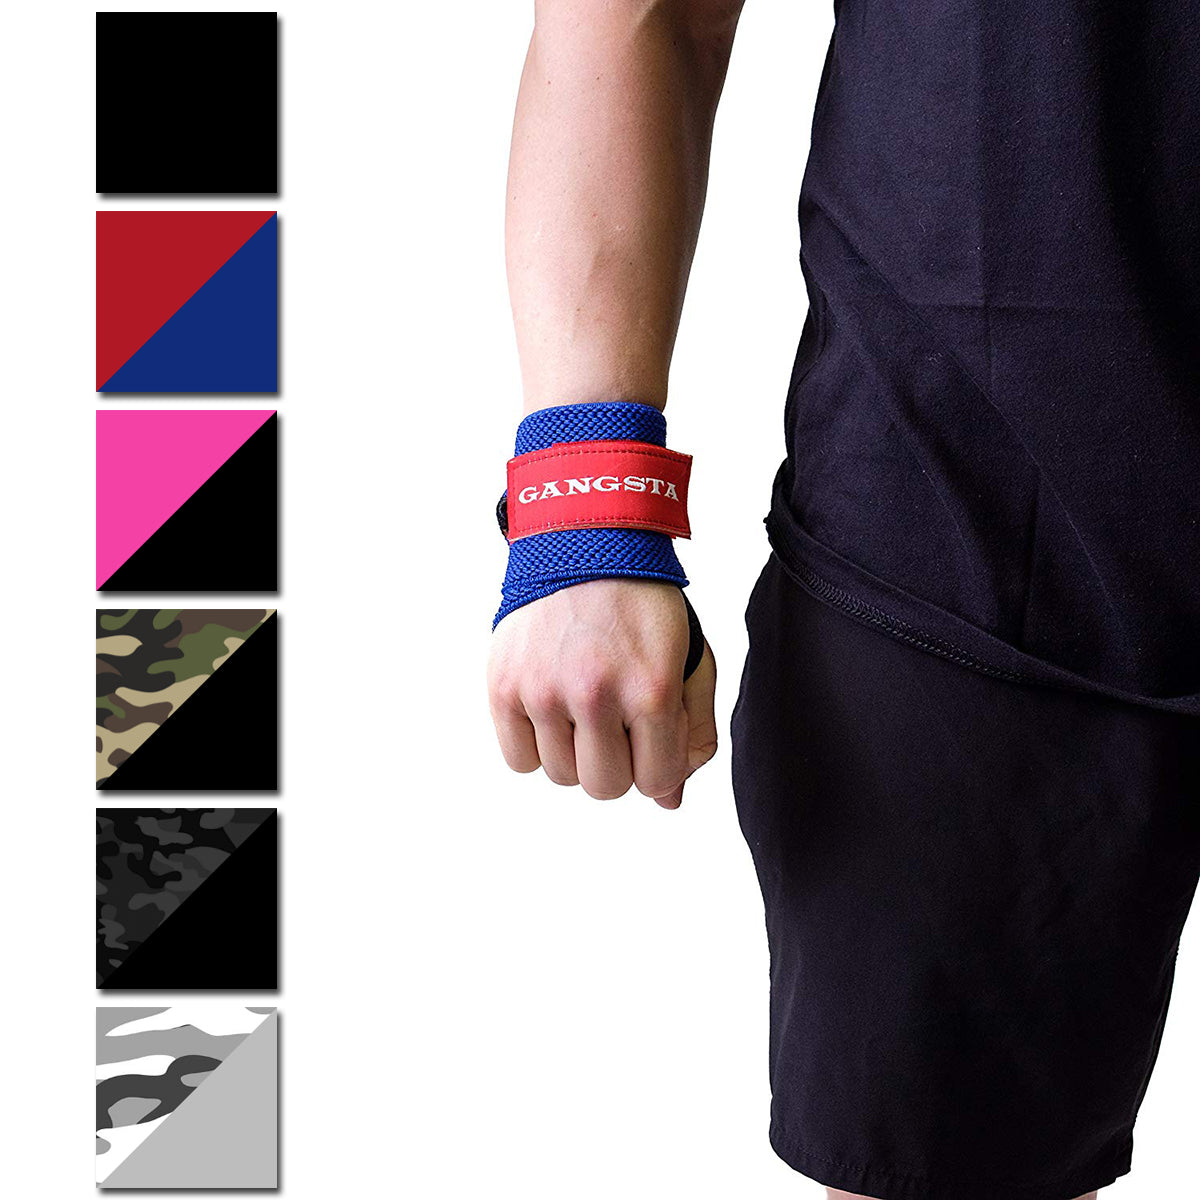 Sling Shot Gangsta Wrist Wraps by Mark Bell, IPF approved weight lifting support Sling Shot